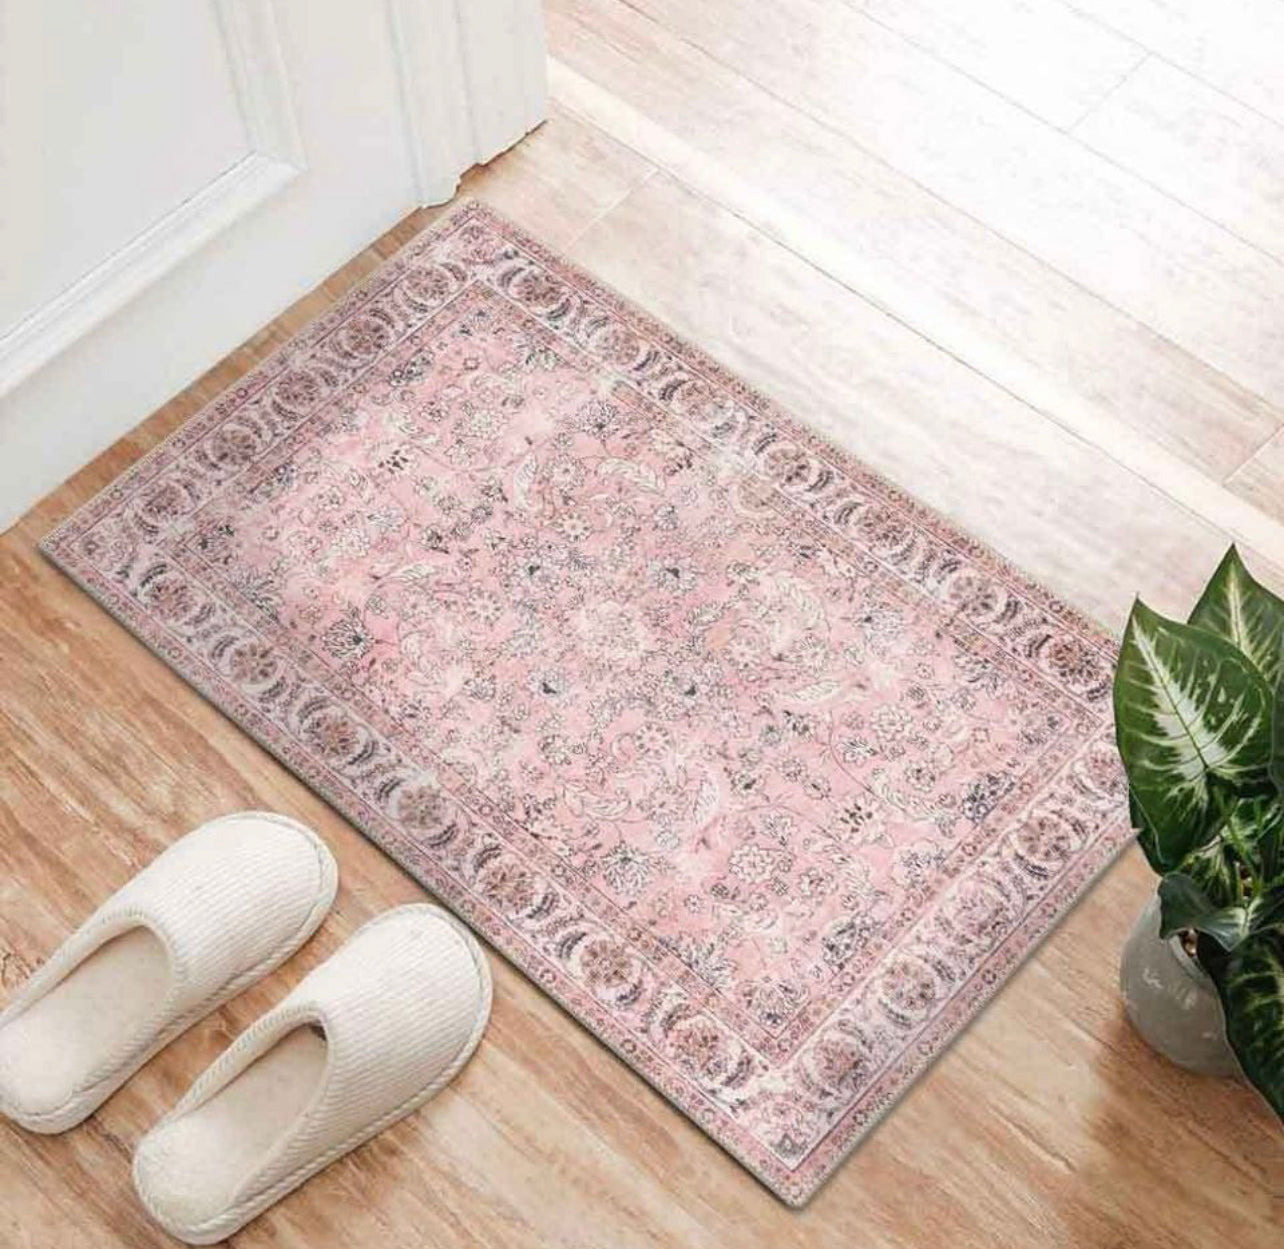 Large Rug Dusty Pink Beautiful Allover Distressed High Traffic Carpet Runner